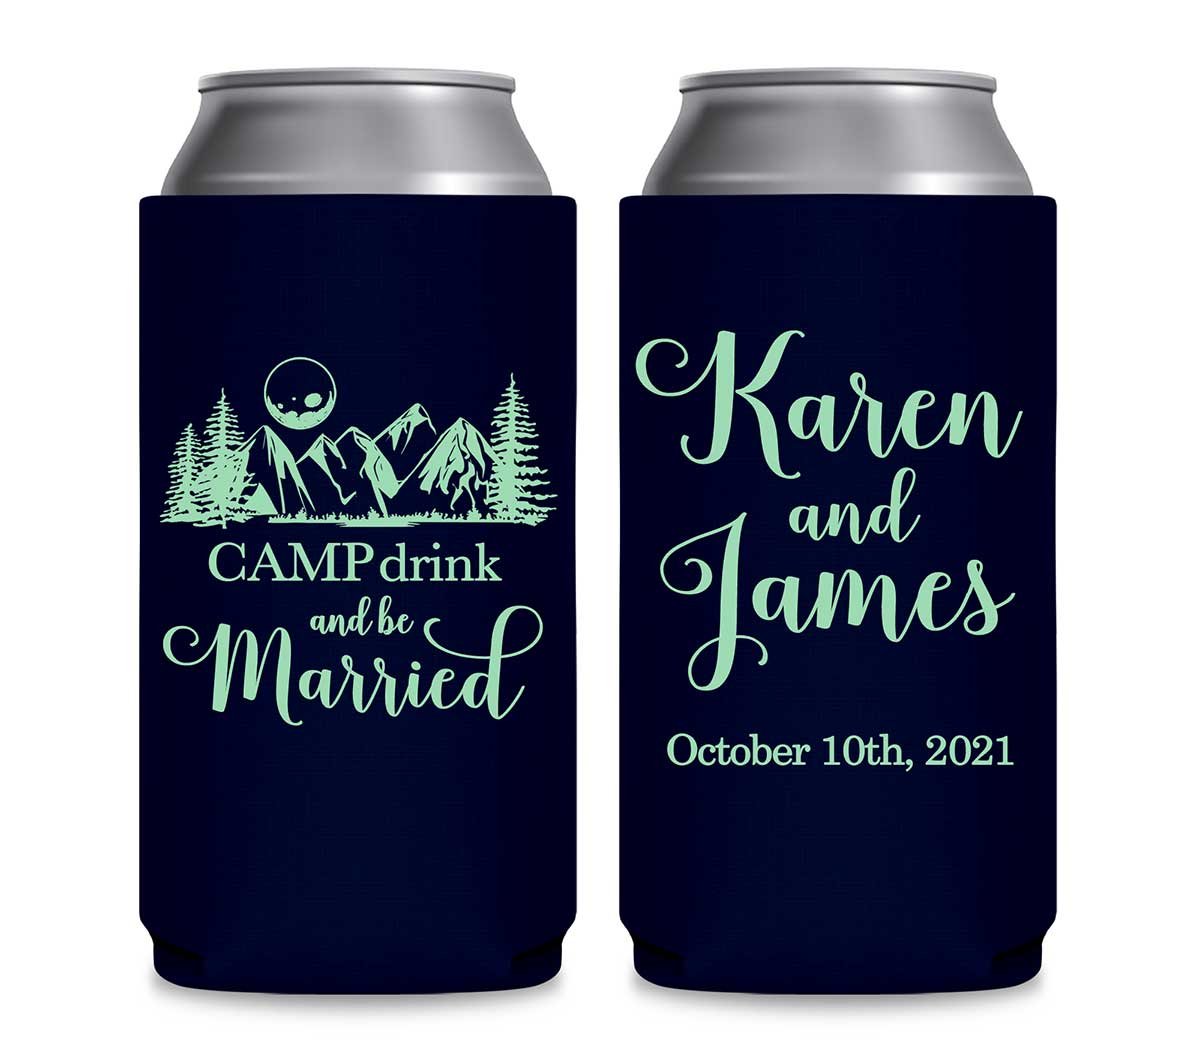 Camp Drink & Be Married 1A Foldable 12 oz Slim Can Koozies Wedding Gifts for Guests